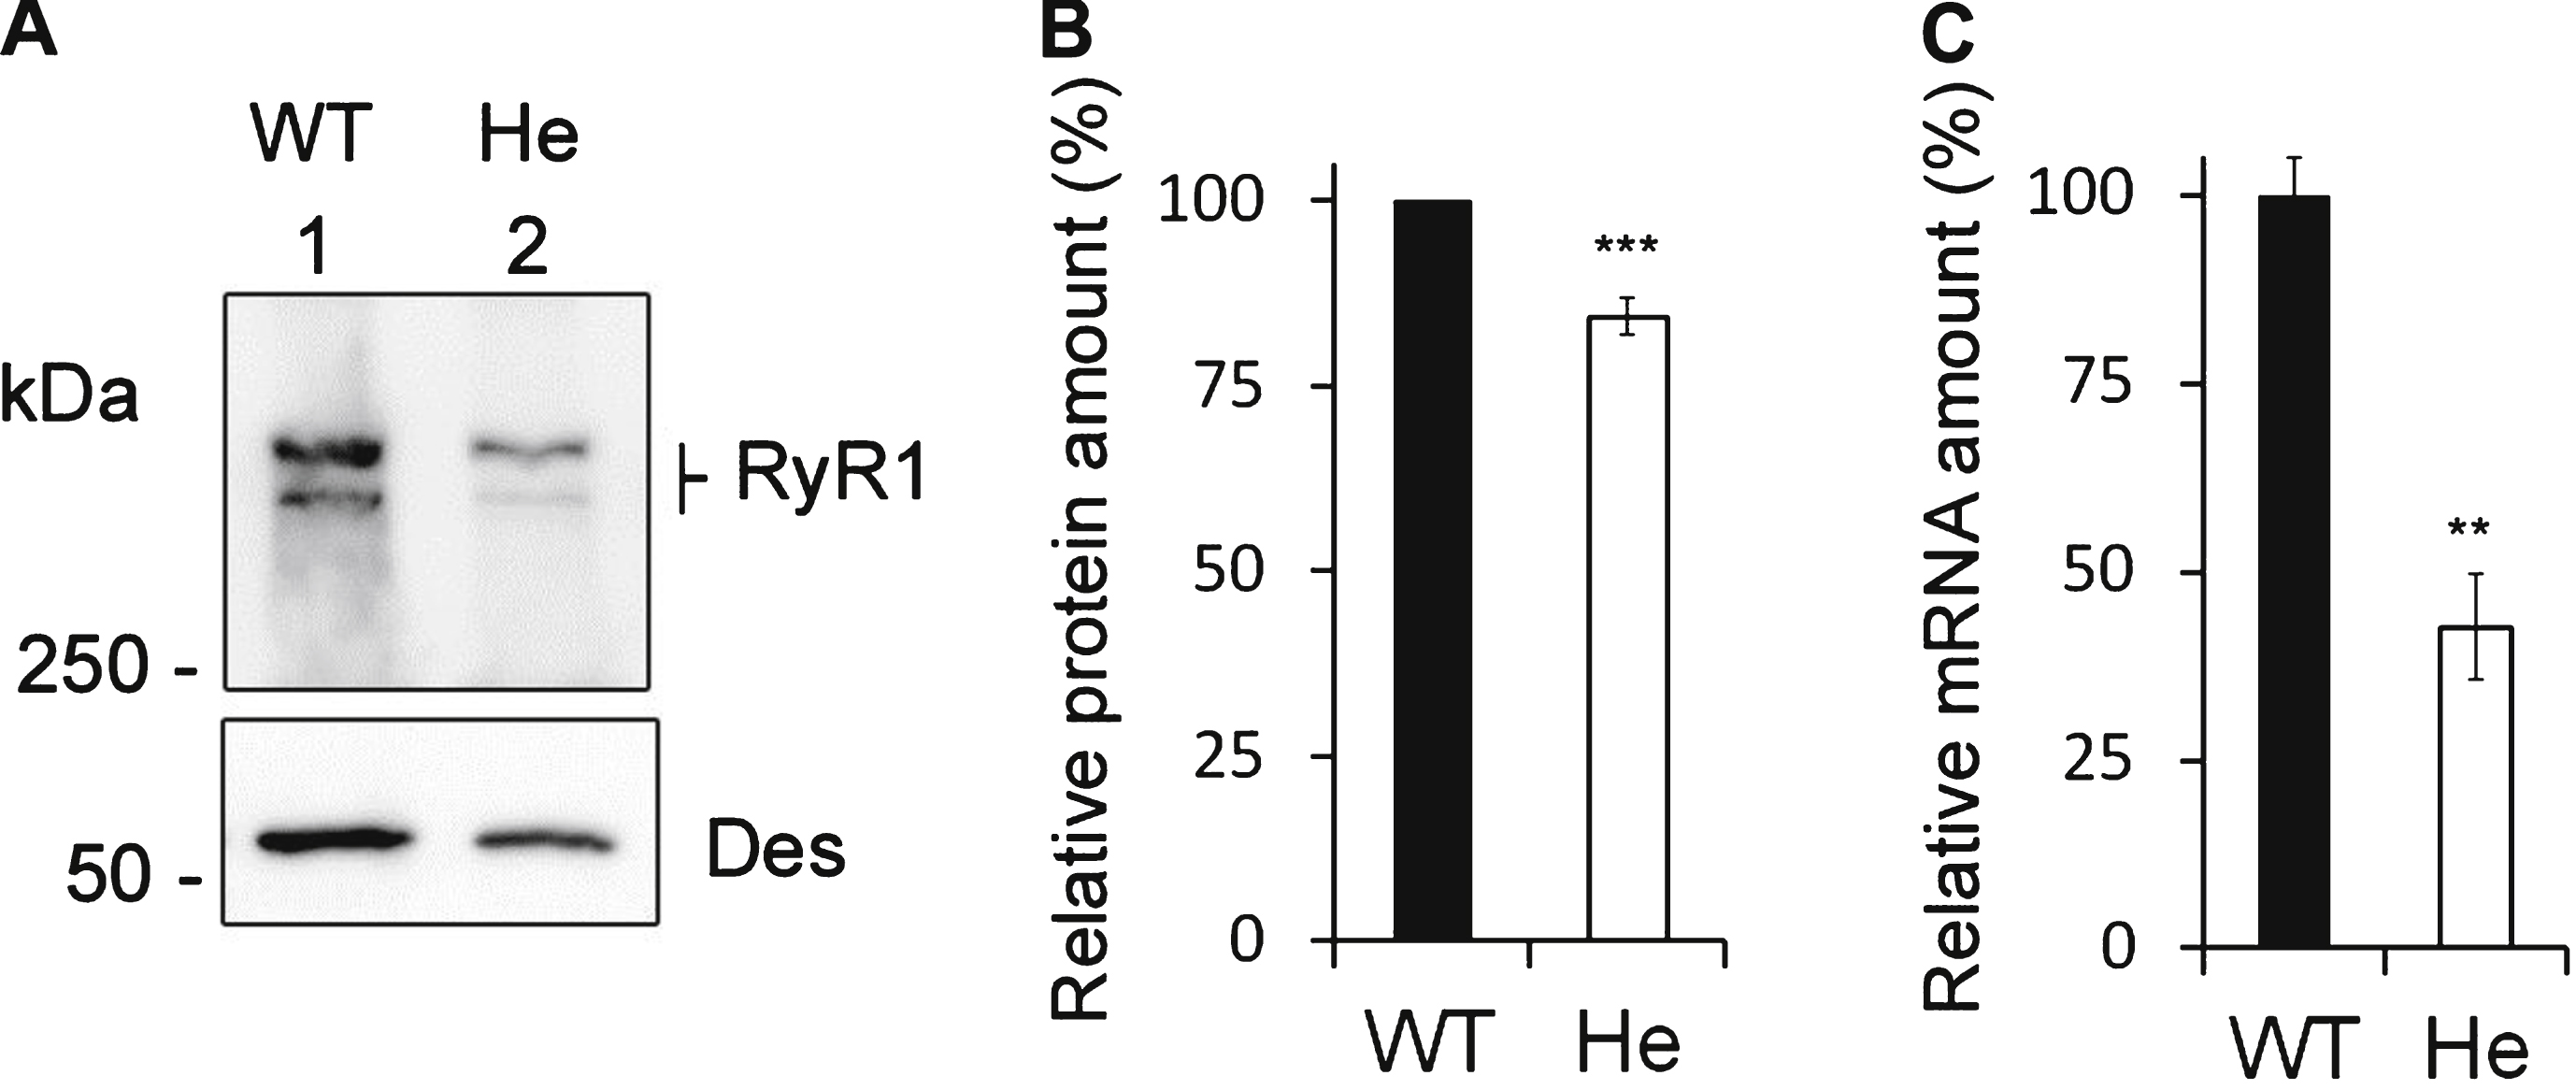 Expression of RyR1 in heterozygous RyR1+/– mouse muscles. (A) Quantitative Western blot analysis of RyR1 expression in skeletal muscle homogenates from WT mice (WT) or from heterozygous RyR1+/– mice (He). (B) The relative amount of RyR1 at the protein level compared to myosin was set to 100% in WT mice. The amount of RyR1 in He mice is presented as mean ± SEM of 9 experiments performed in 3 different mice. ***p <  0.001 Student’s t-test between WT and He. (C) Q-RT-PCR analysis of levels of RyR1 mRNA expressed as a percentage of WT mice (which relative expression compared to GAPDH was set to 100%). The data are presented as mean ± SEM of 3 different mice. **p <  0.01 Student’s t-test between WT and He.